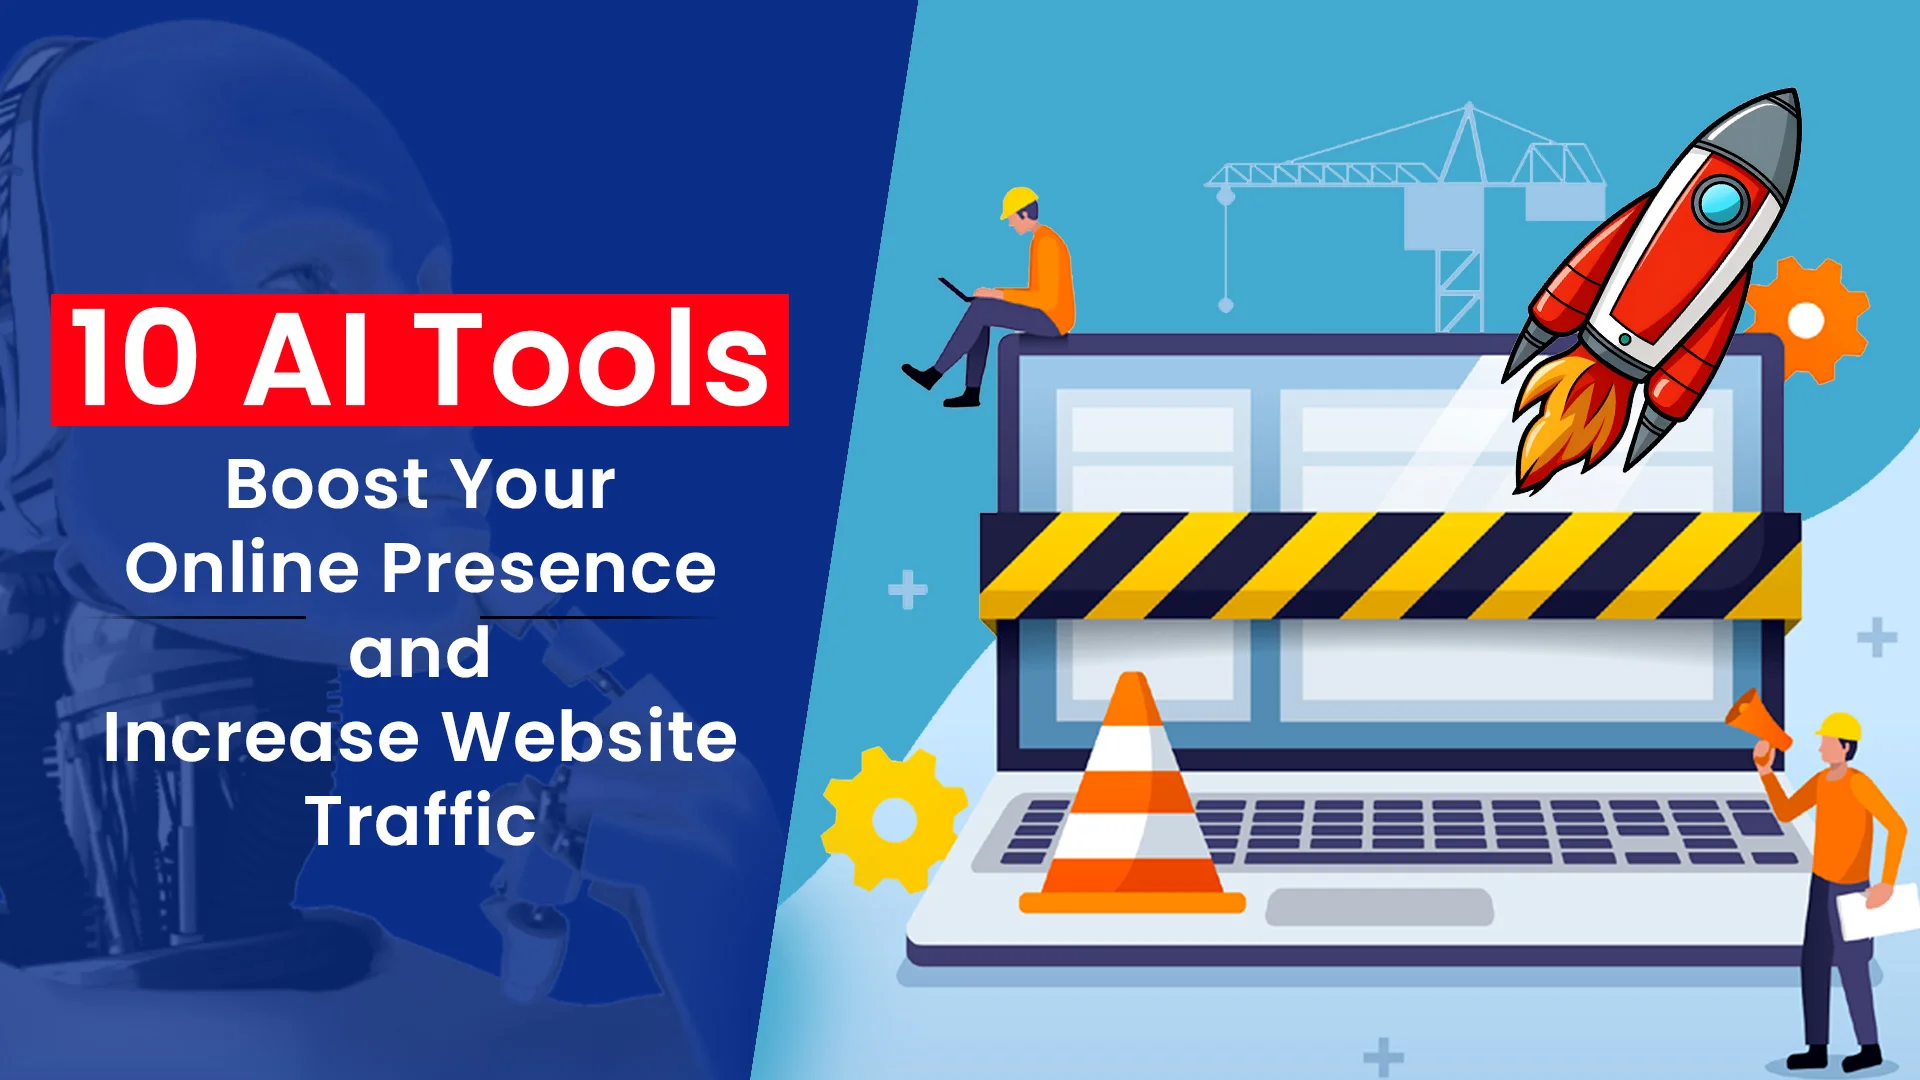 Boost Your Online Presence and Increase Website Traffic with AI Tools - digitalposh.co.in